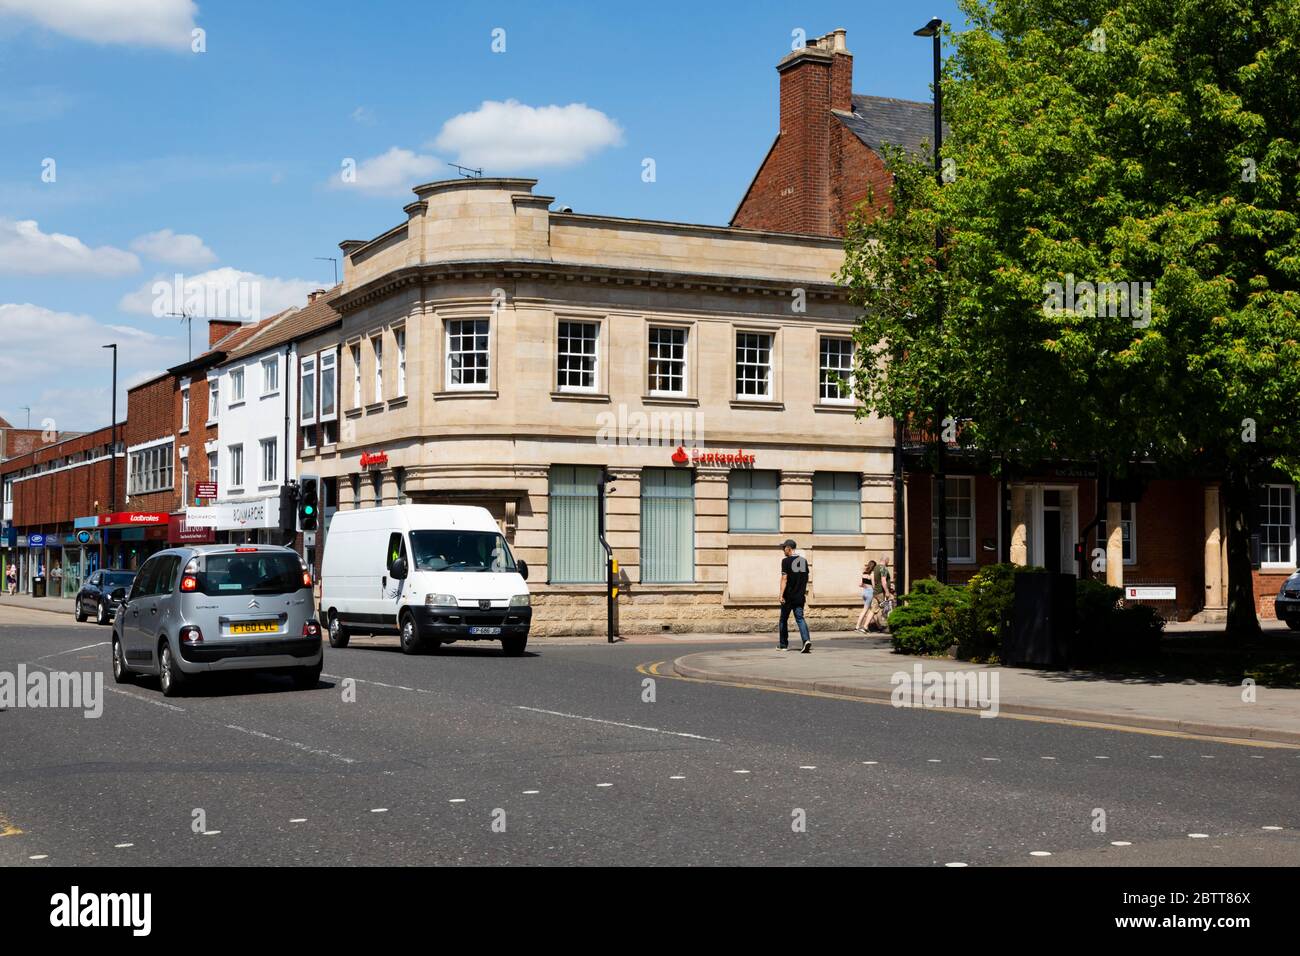 High Street und St Peters Hill, Grantham, Lincolnshire, England. Mai 2020 Stockfoto